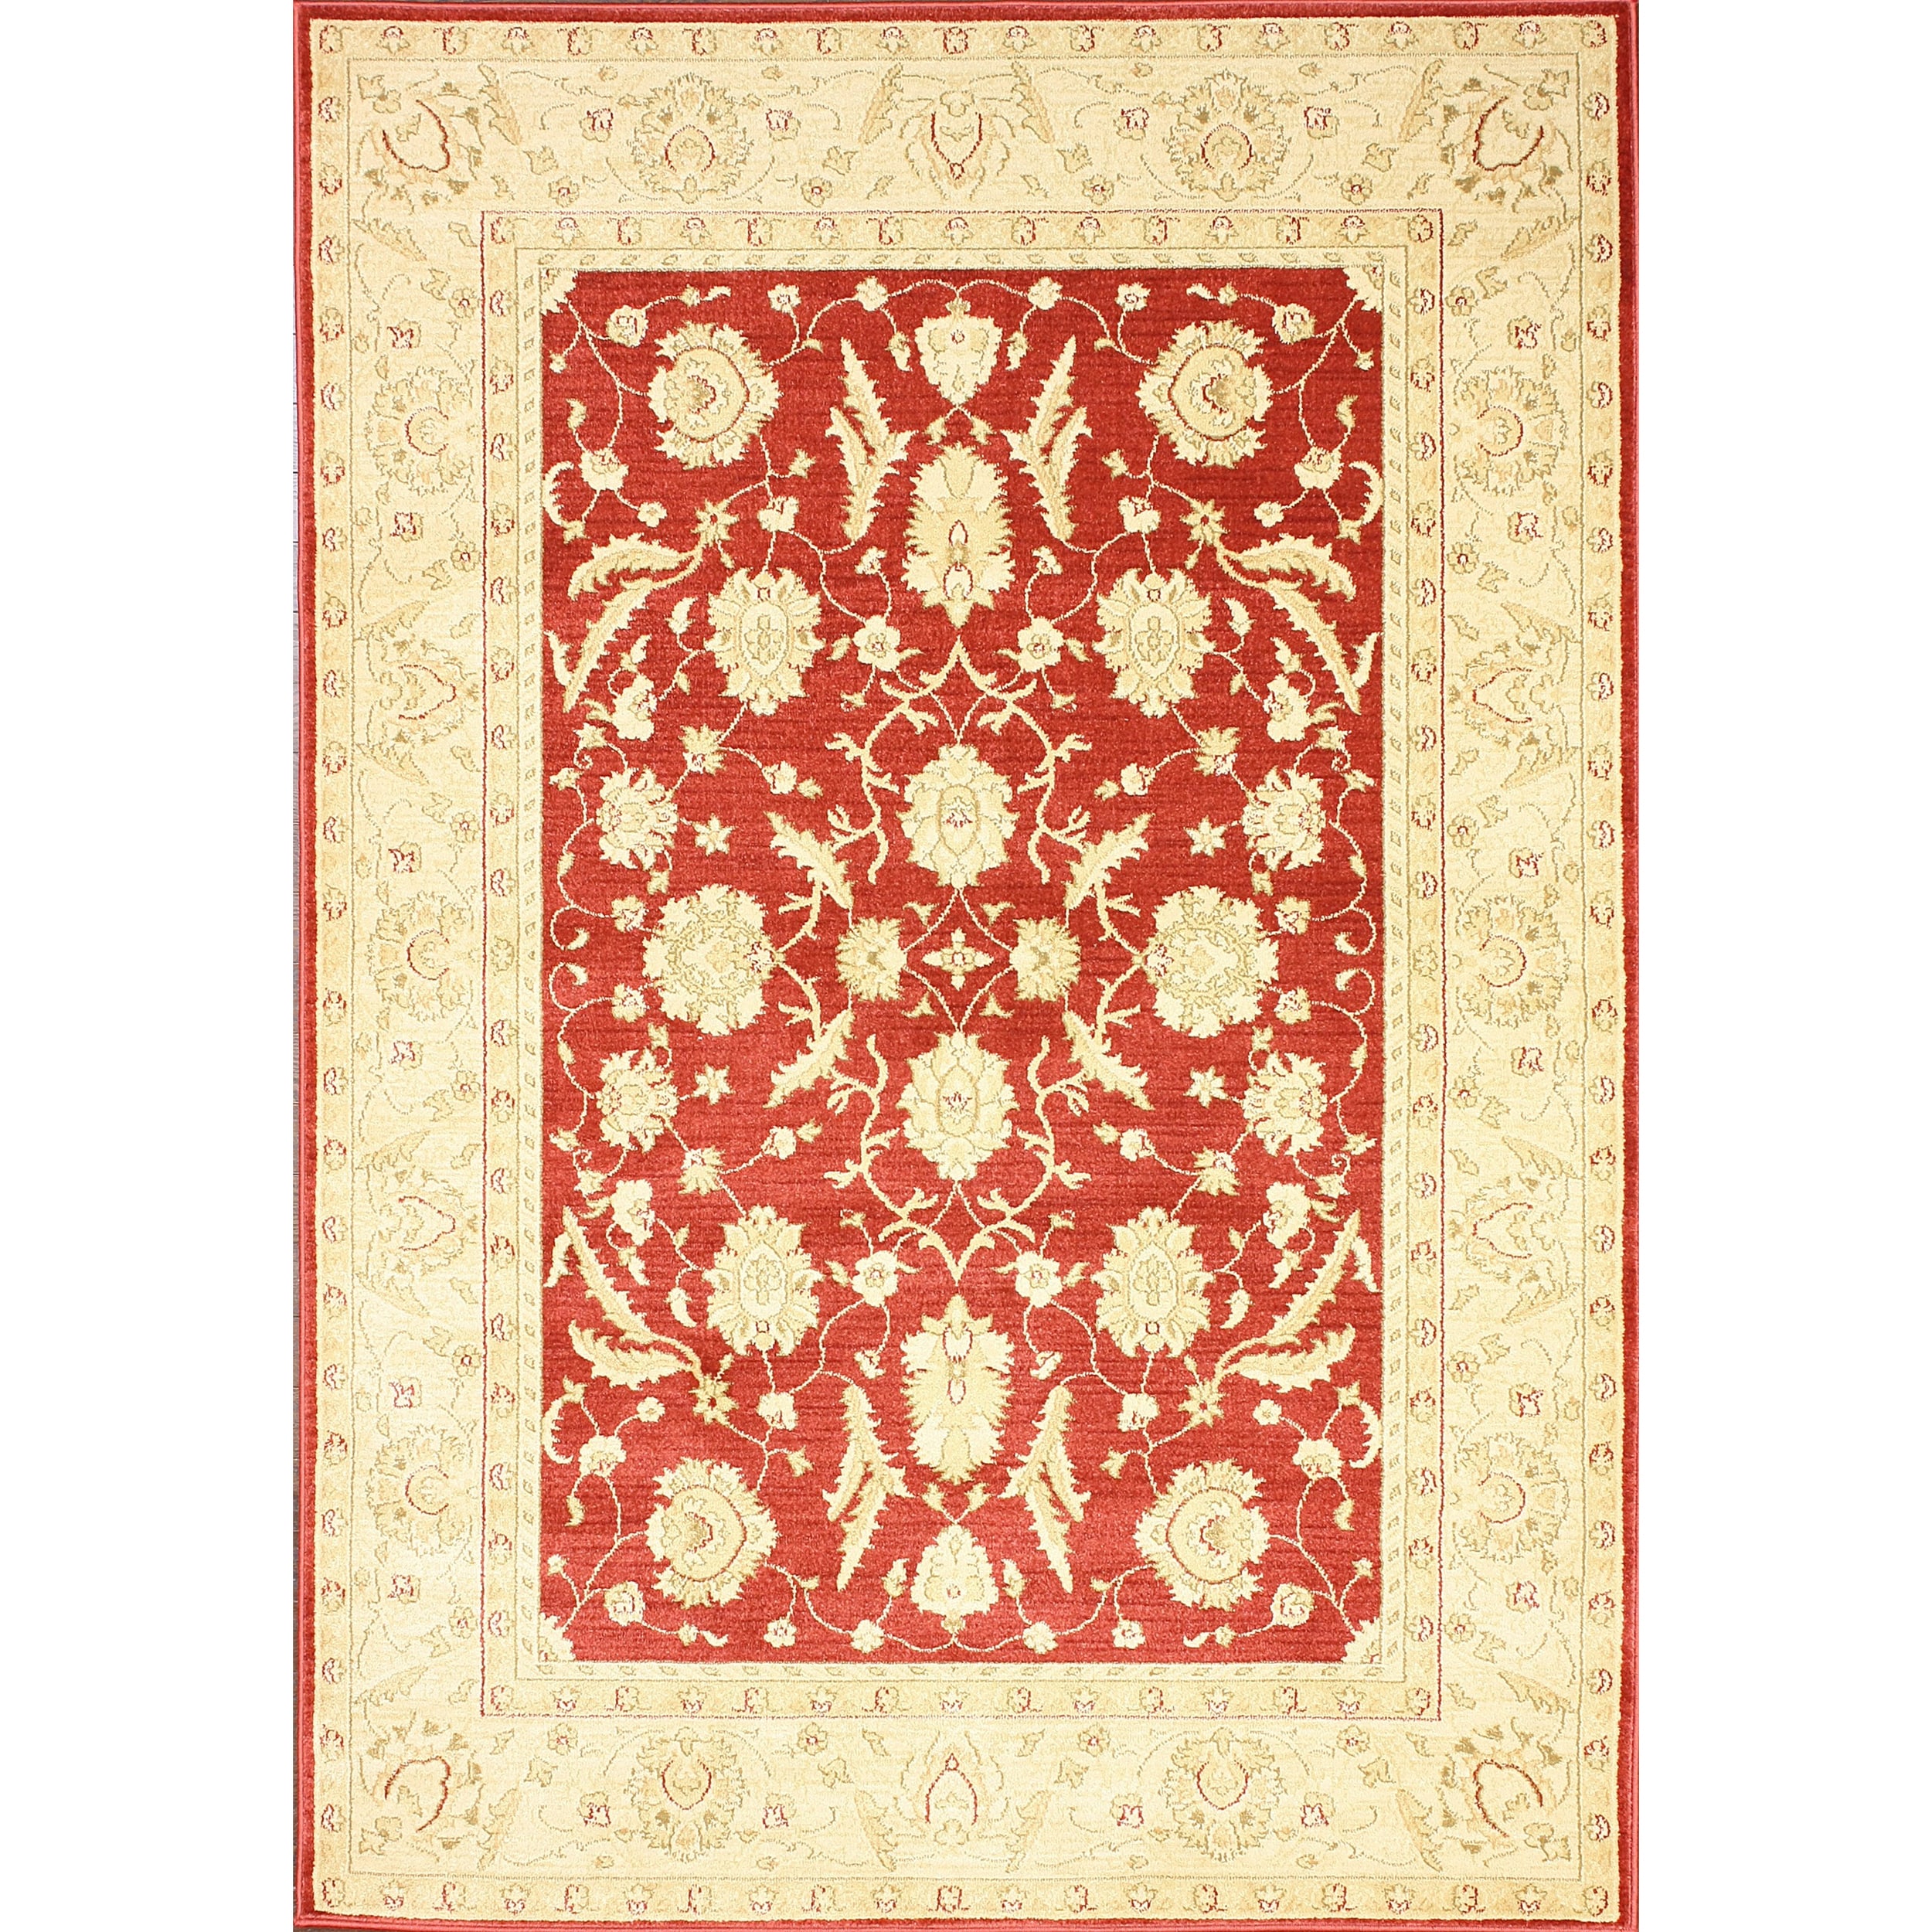 Nuloom Traditional Ziegler Mahal Red Rug (53 X 77)